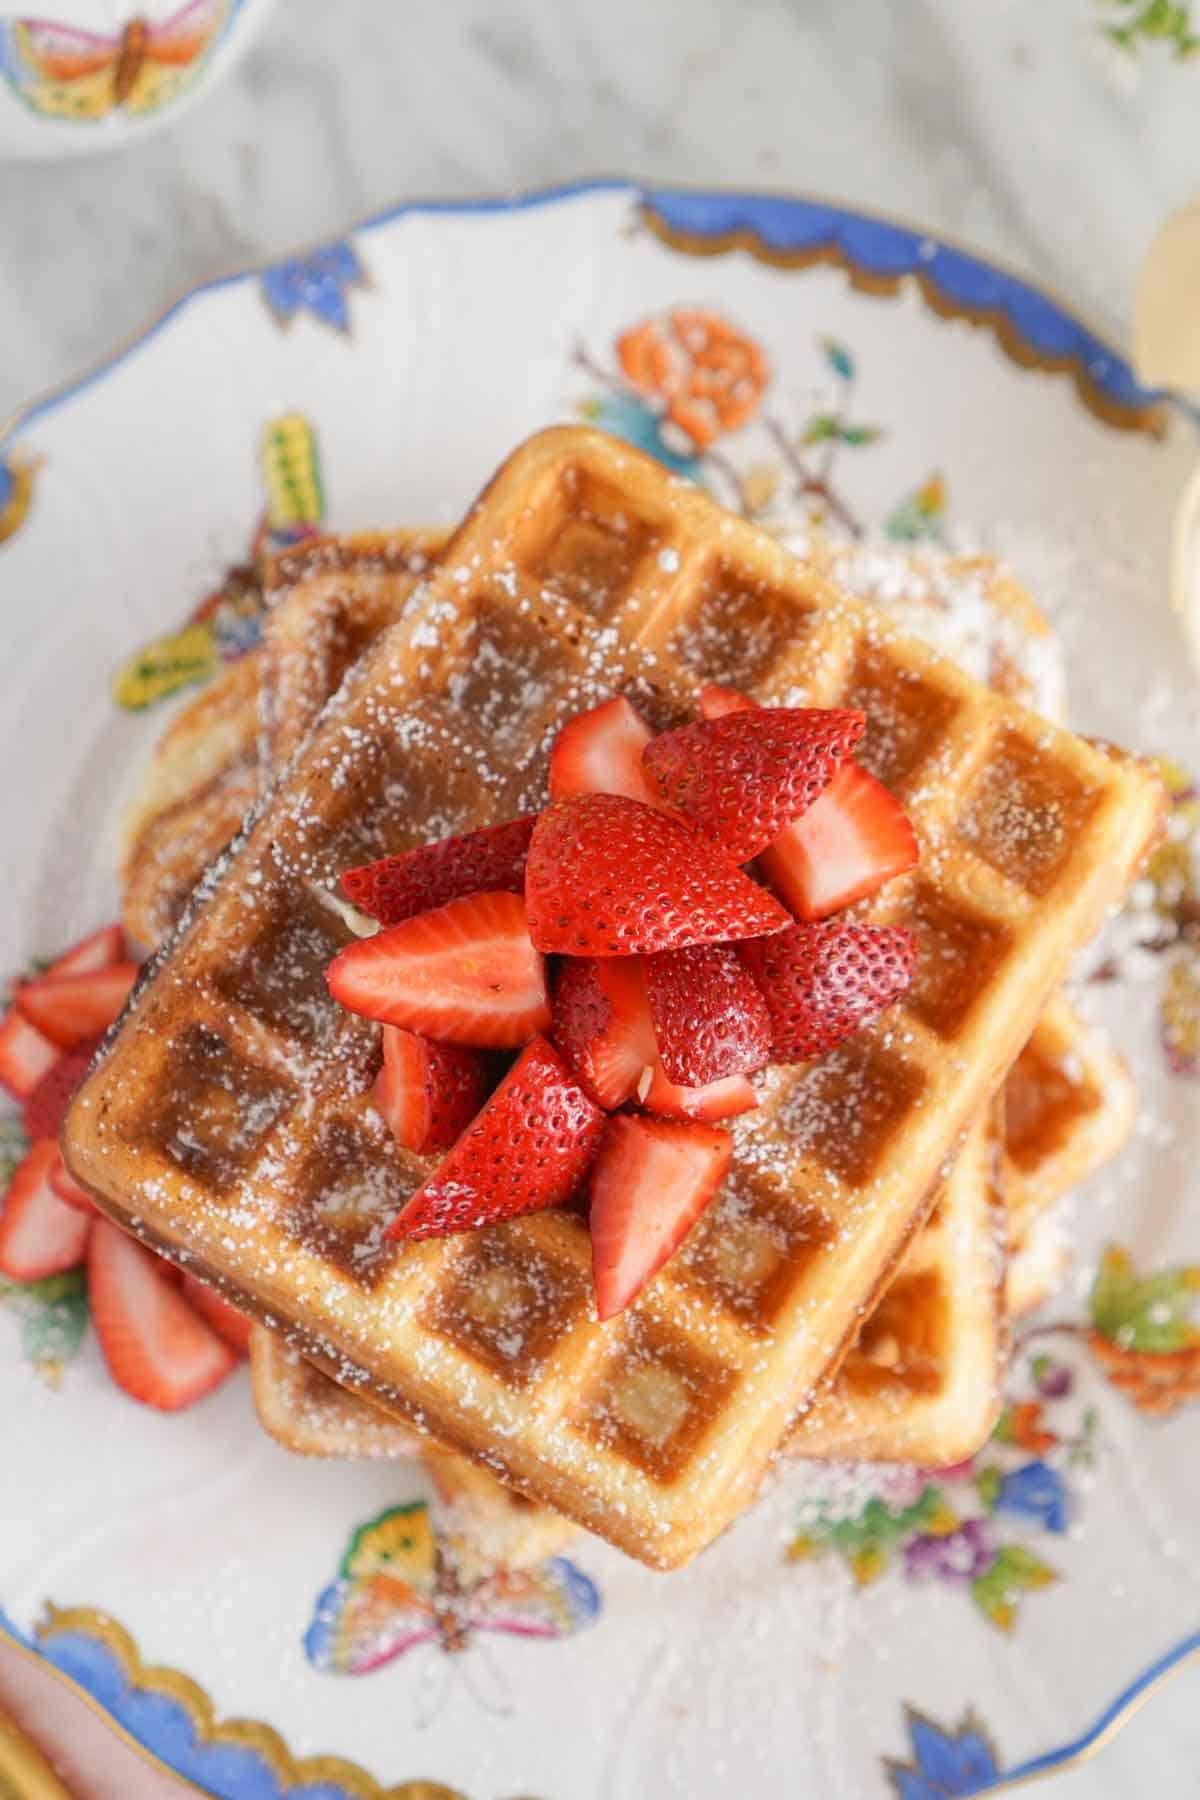 Overhead view of strawberries on top of a stack of waffles dusted with powdered sugar.